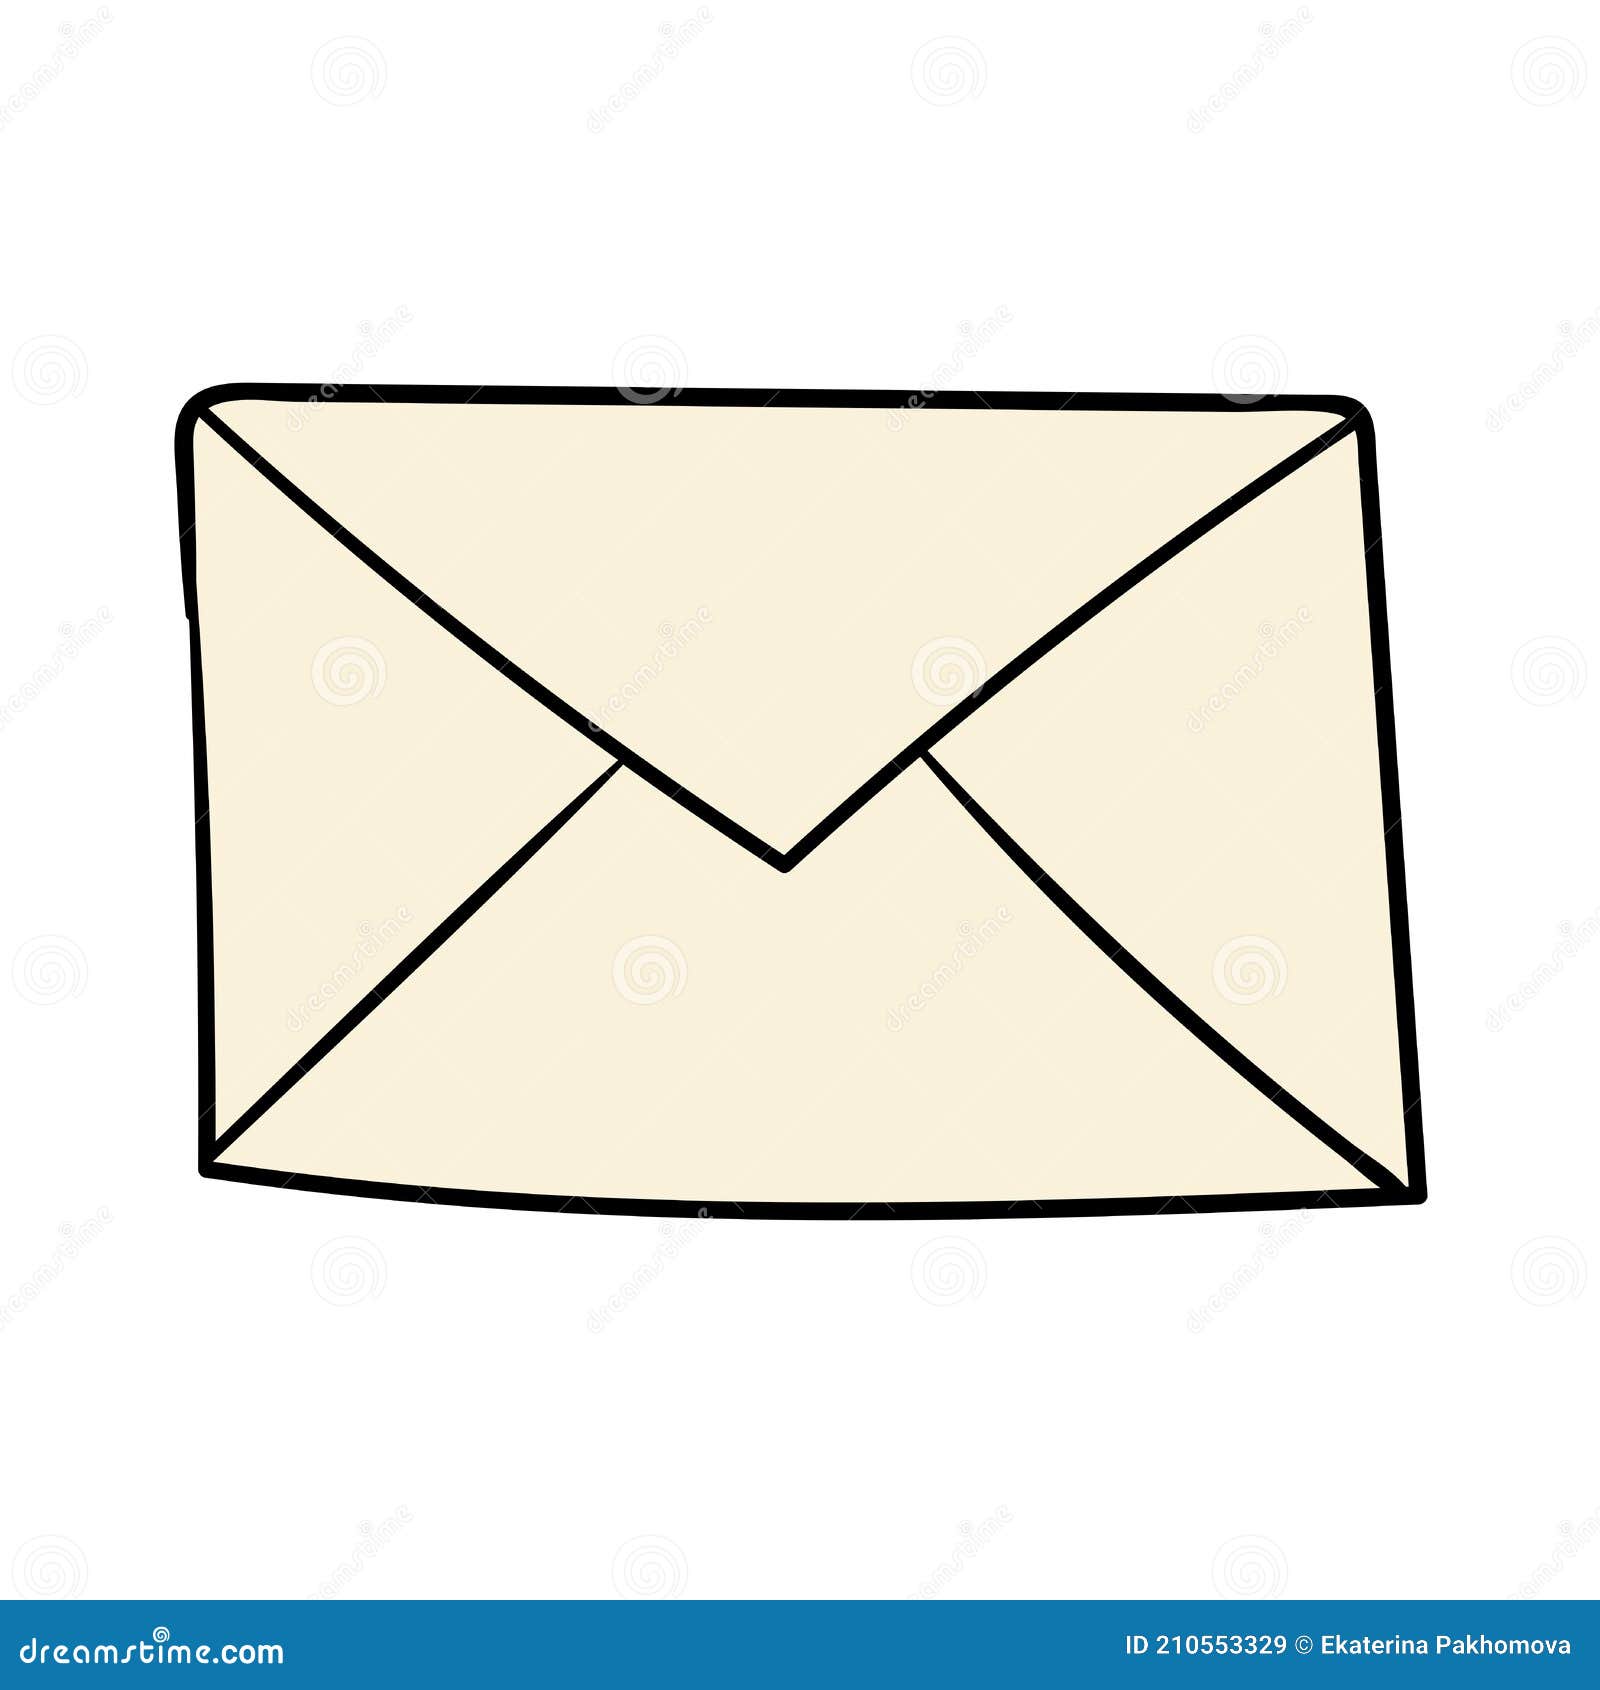 Cartoon Doodle Linear Mail, Letter Isolated Stock Vector - Illustration of  doodle, business: 210553329